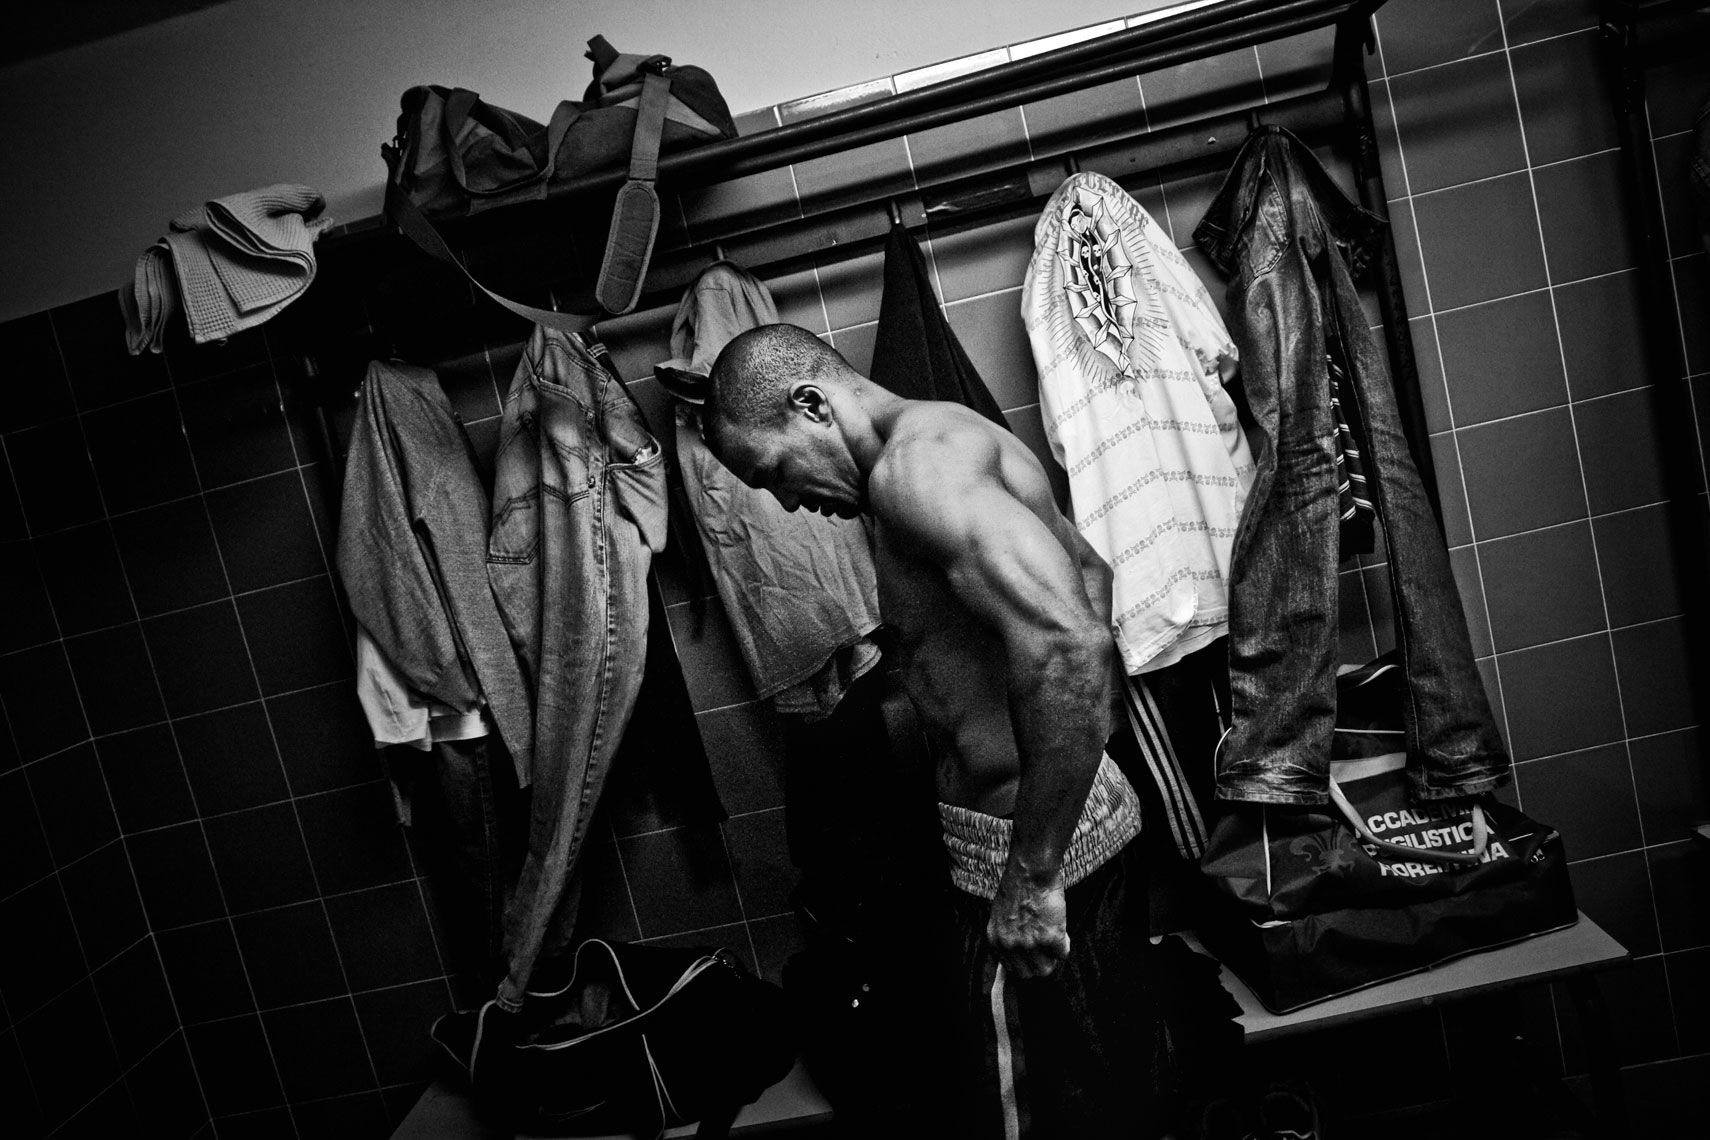 ITALY. Florence, 7th October 2011. Leonard Bundu after one training session in preparation of the match for the EBU (European Boxing Union) Welter Weight crown.